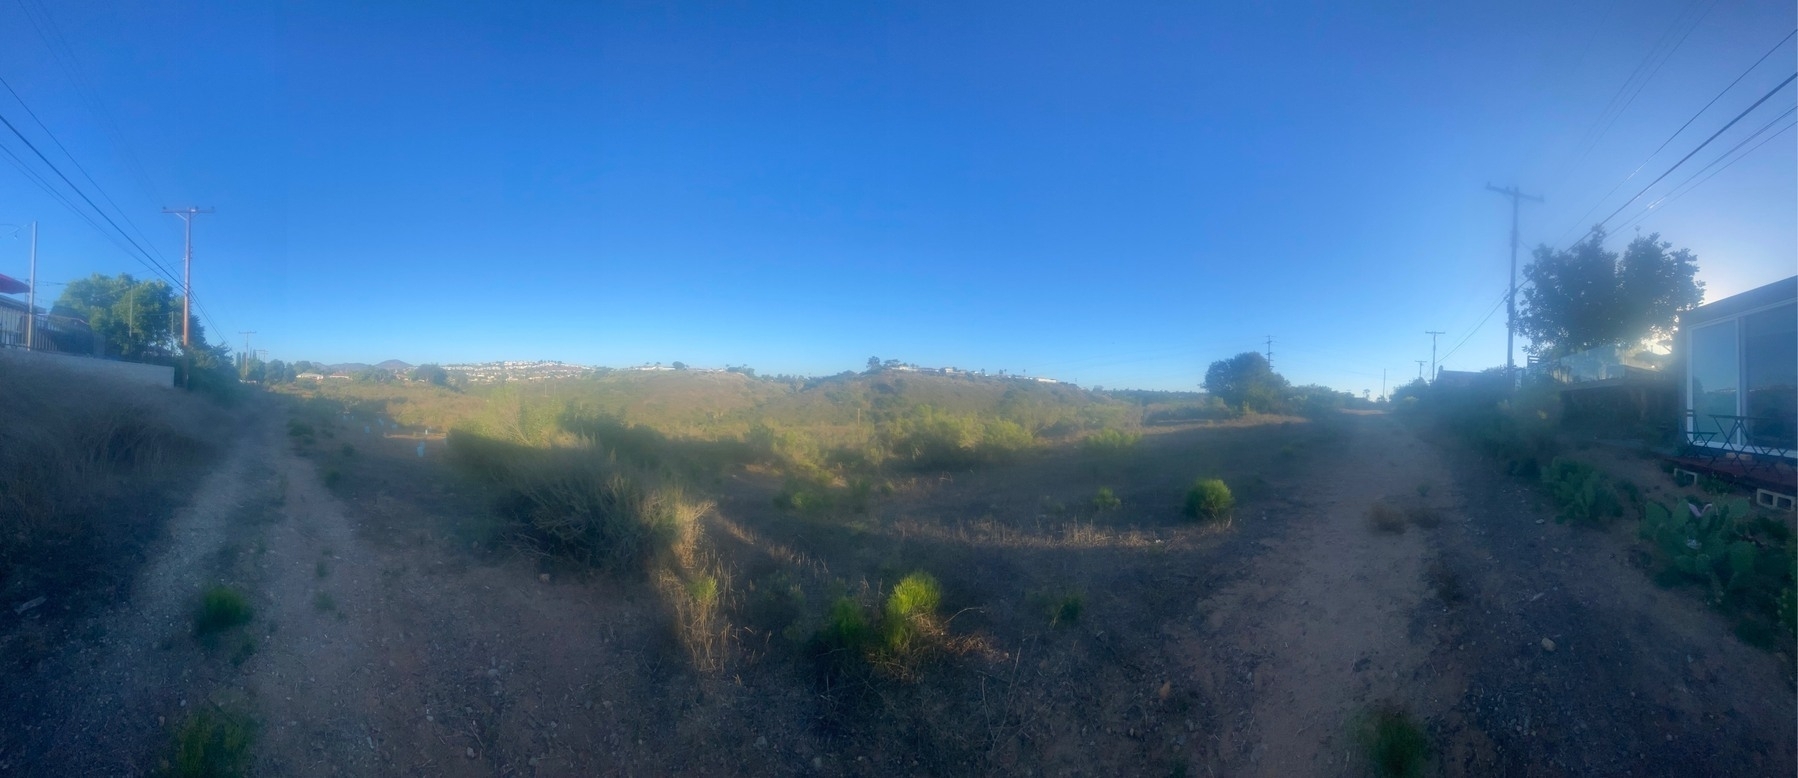 Panoramic view from the rim of a scrub canyon with houses lining the far side and a blue sky above.